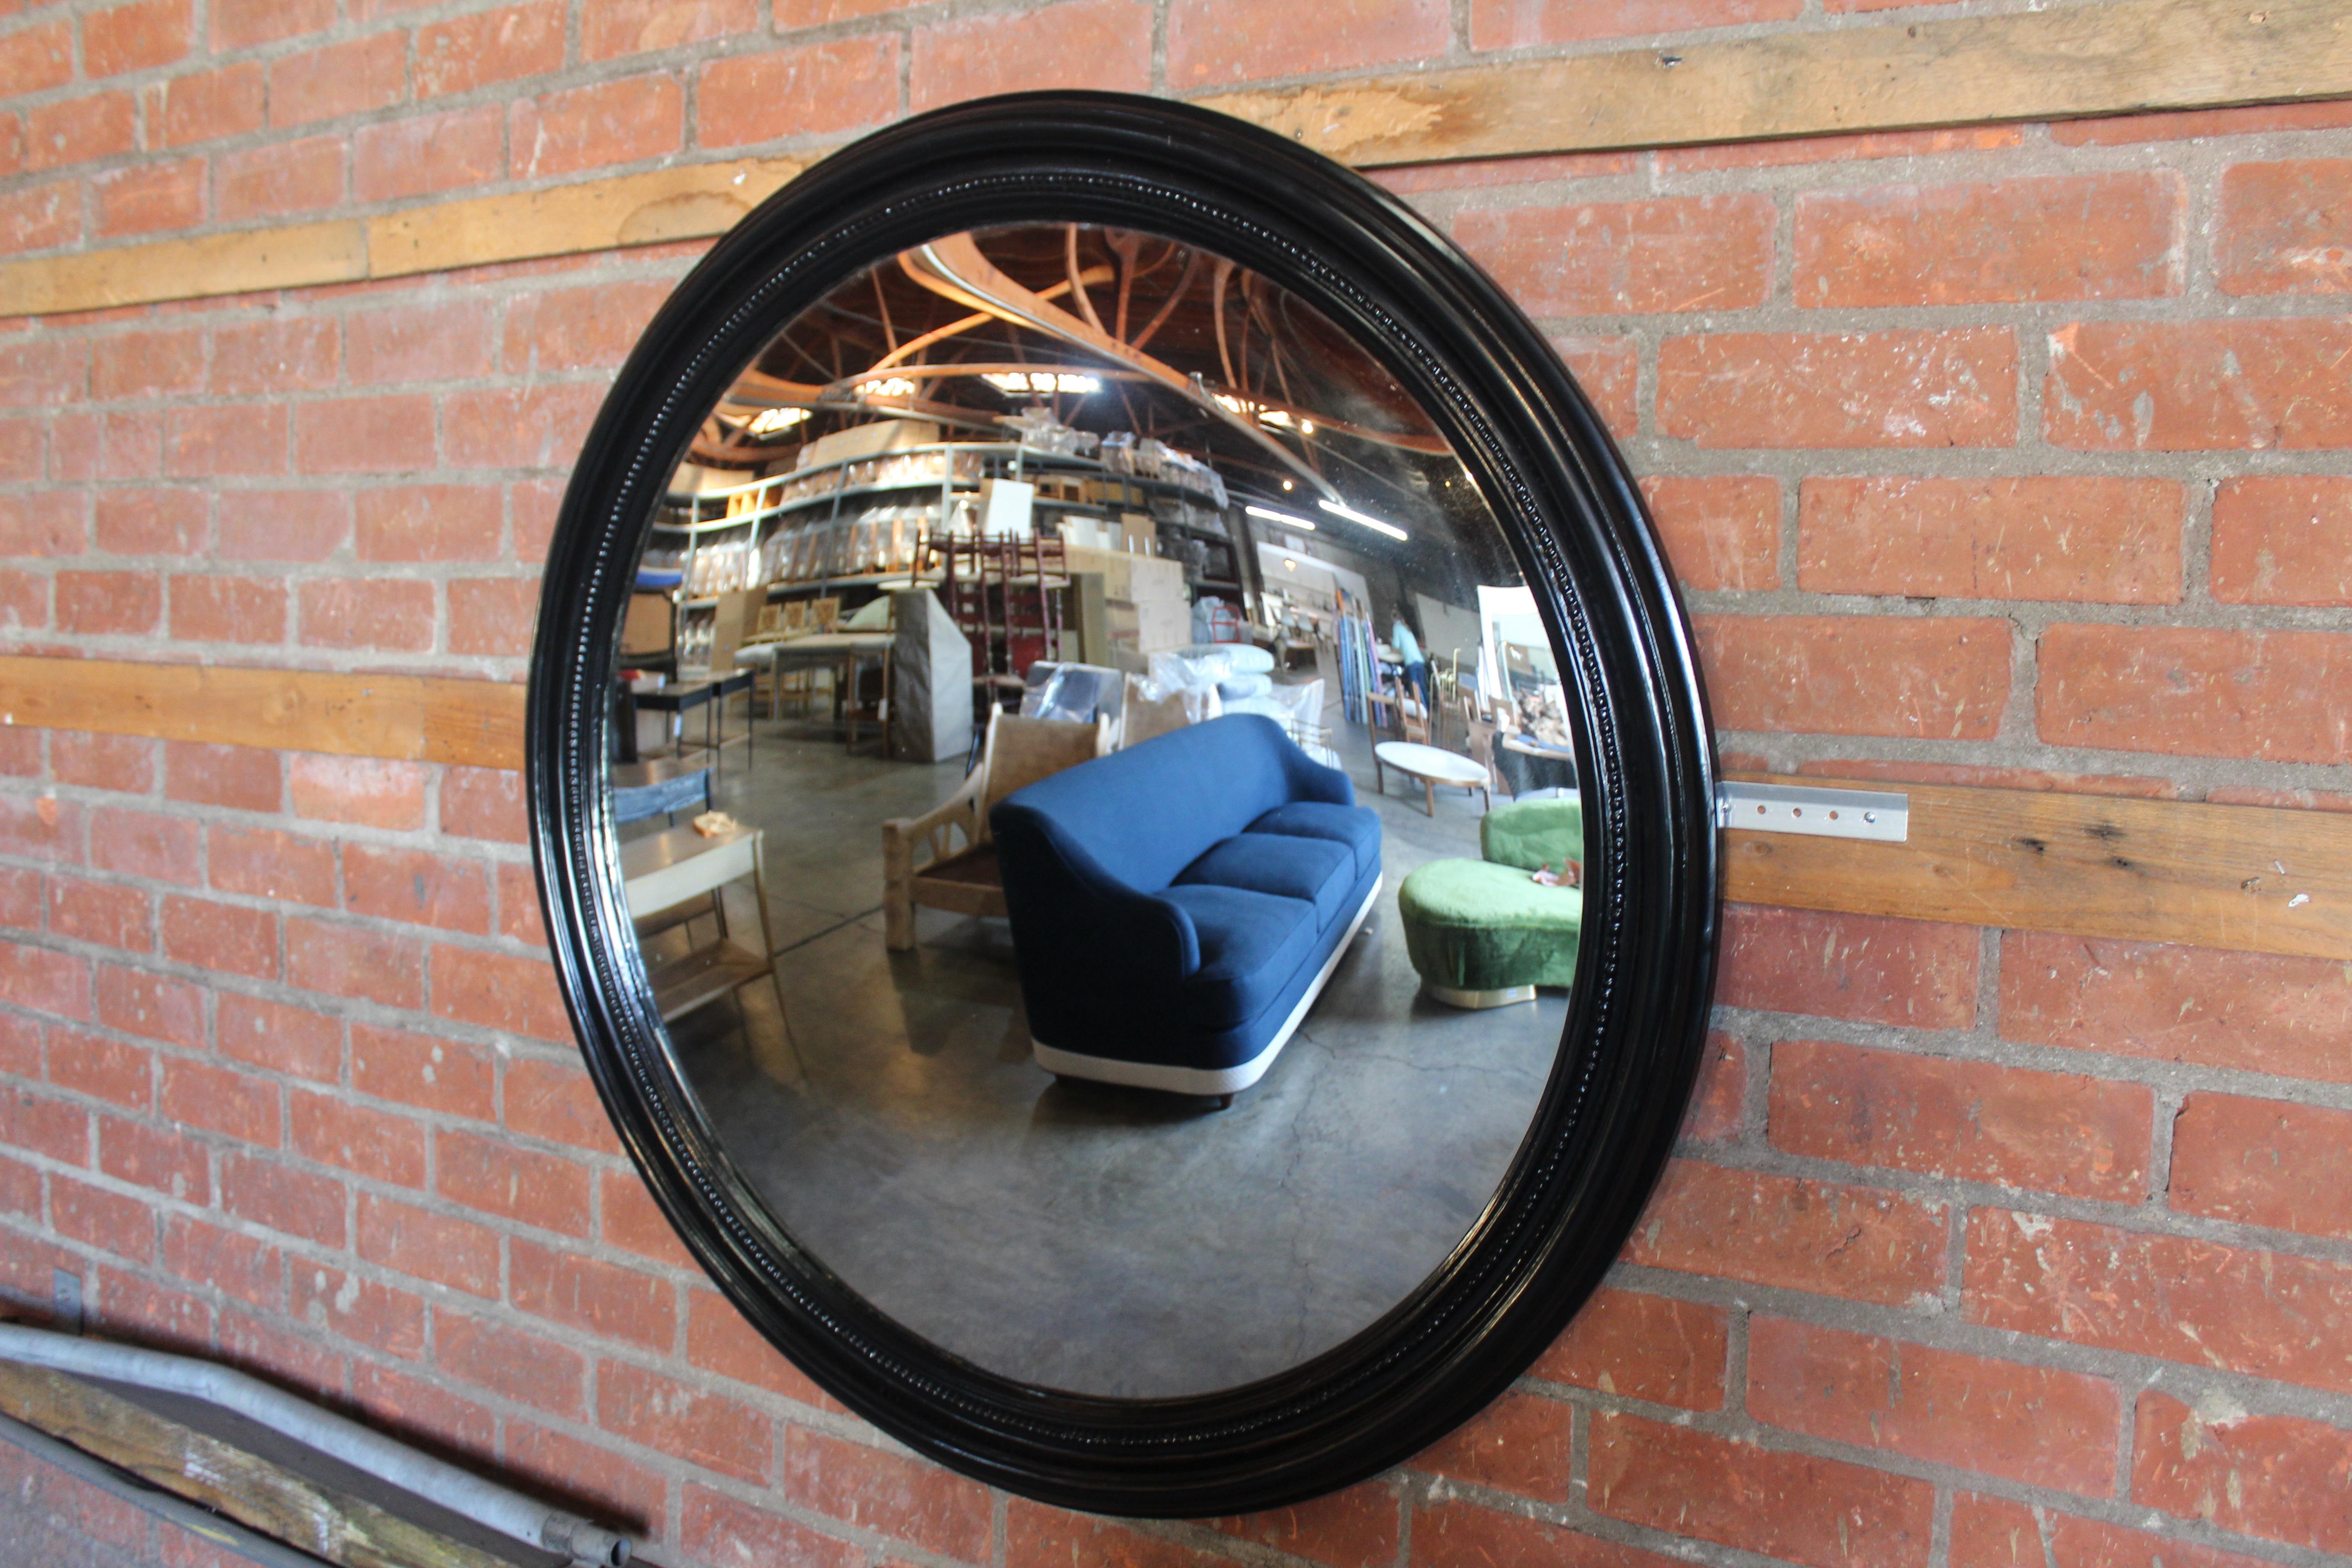 A vintage French convex mirror, 1940s, found in Paris. Black frame. Overall good condition.